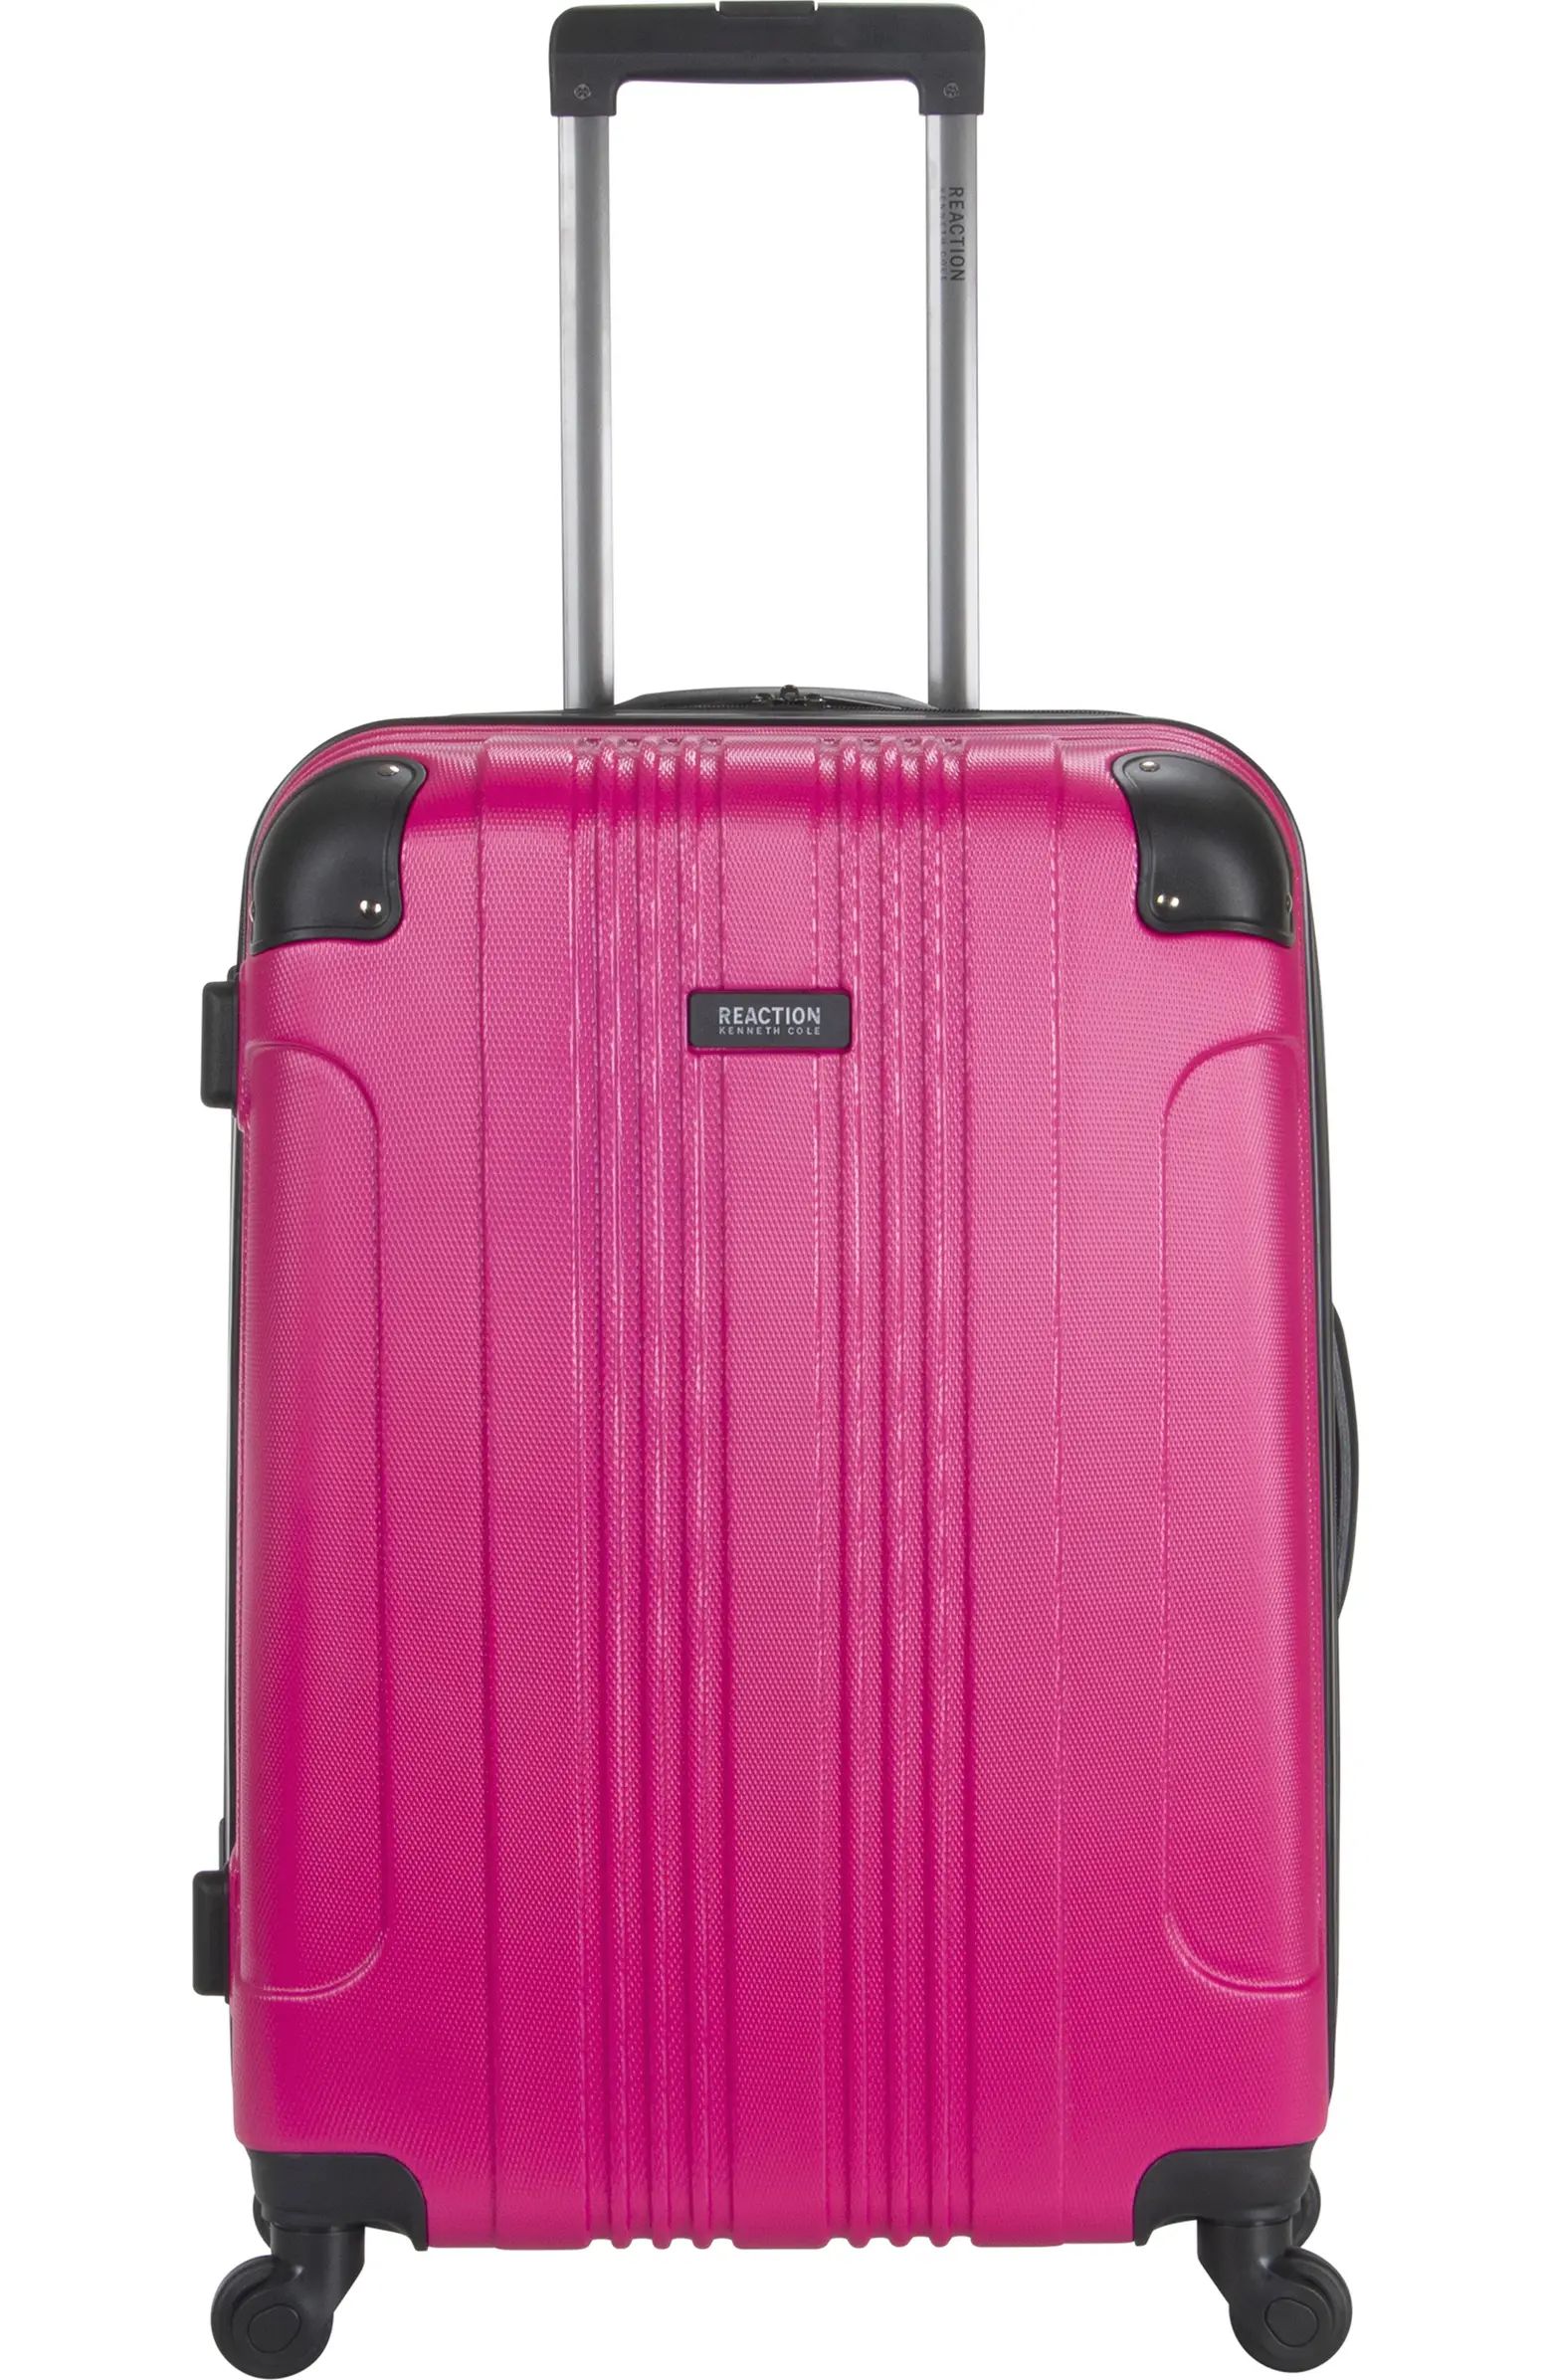 Out Of Bounds 24" Hardside Luggage | Nordstrom Rack